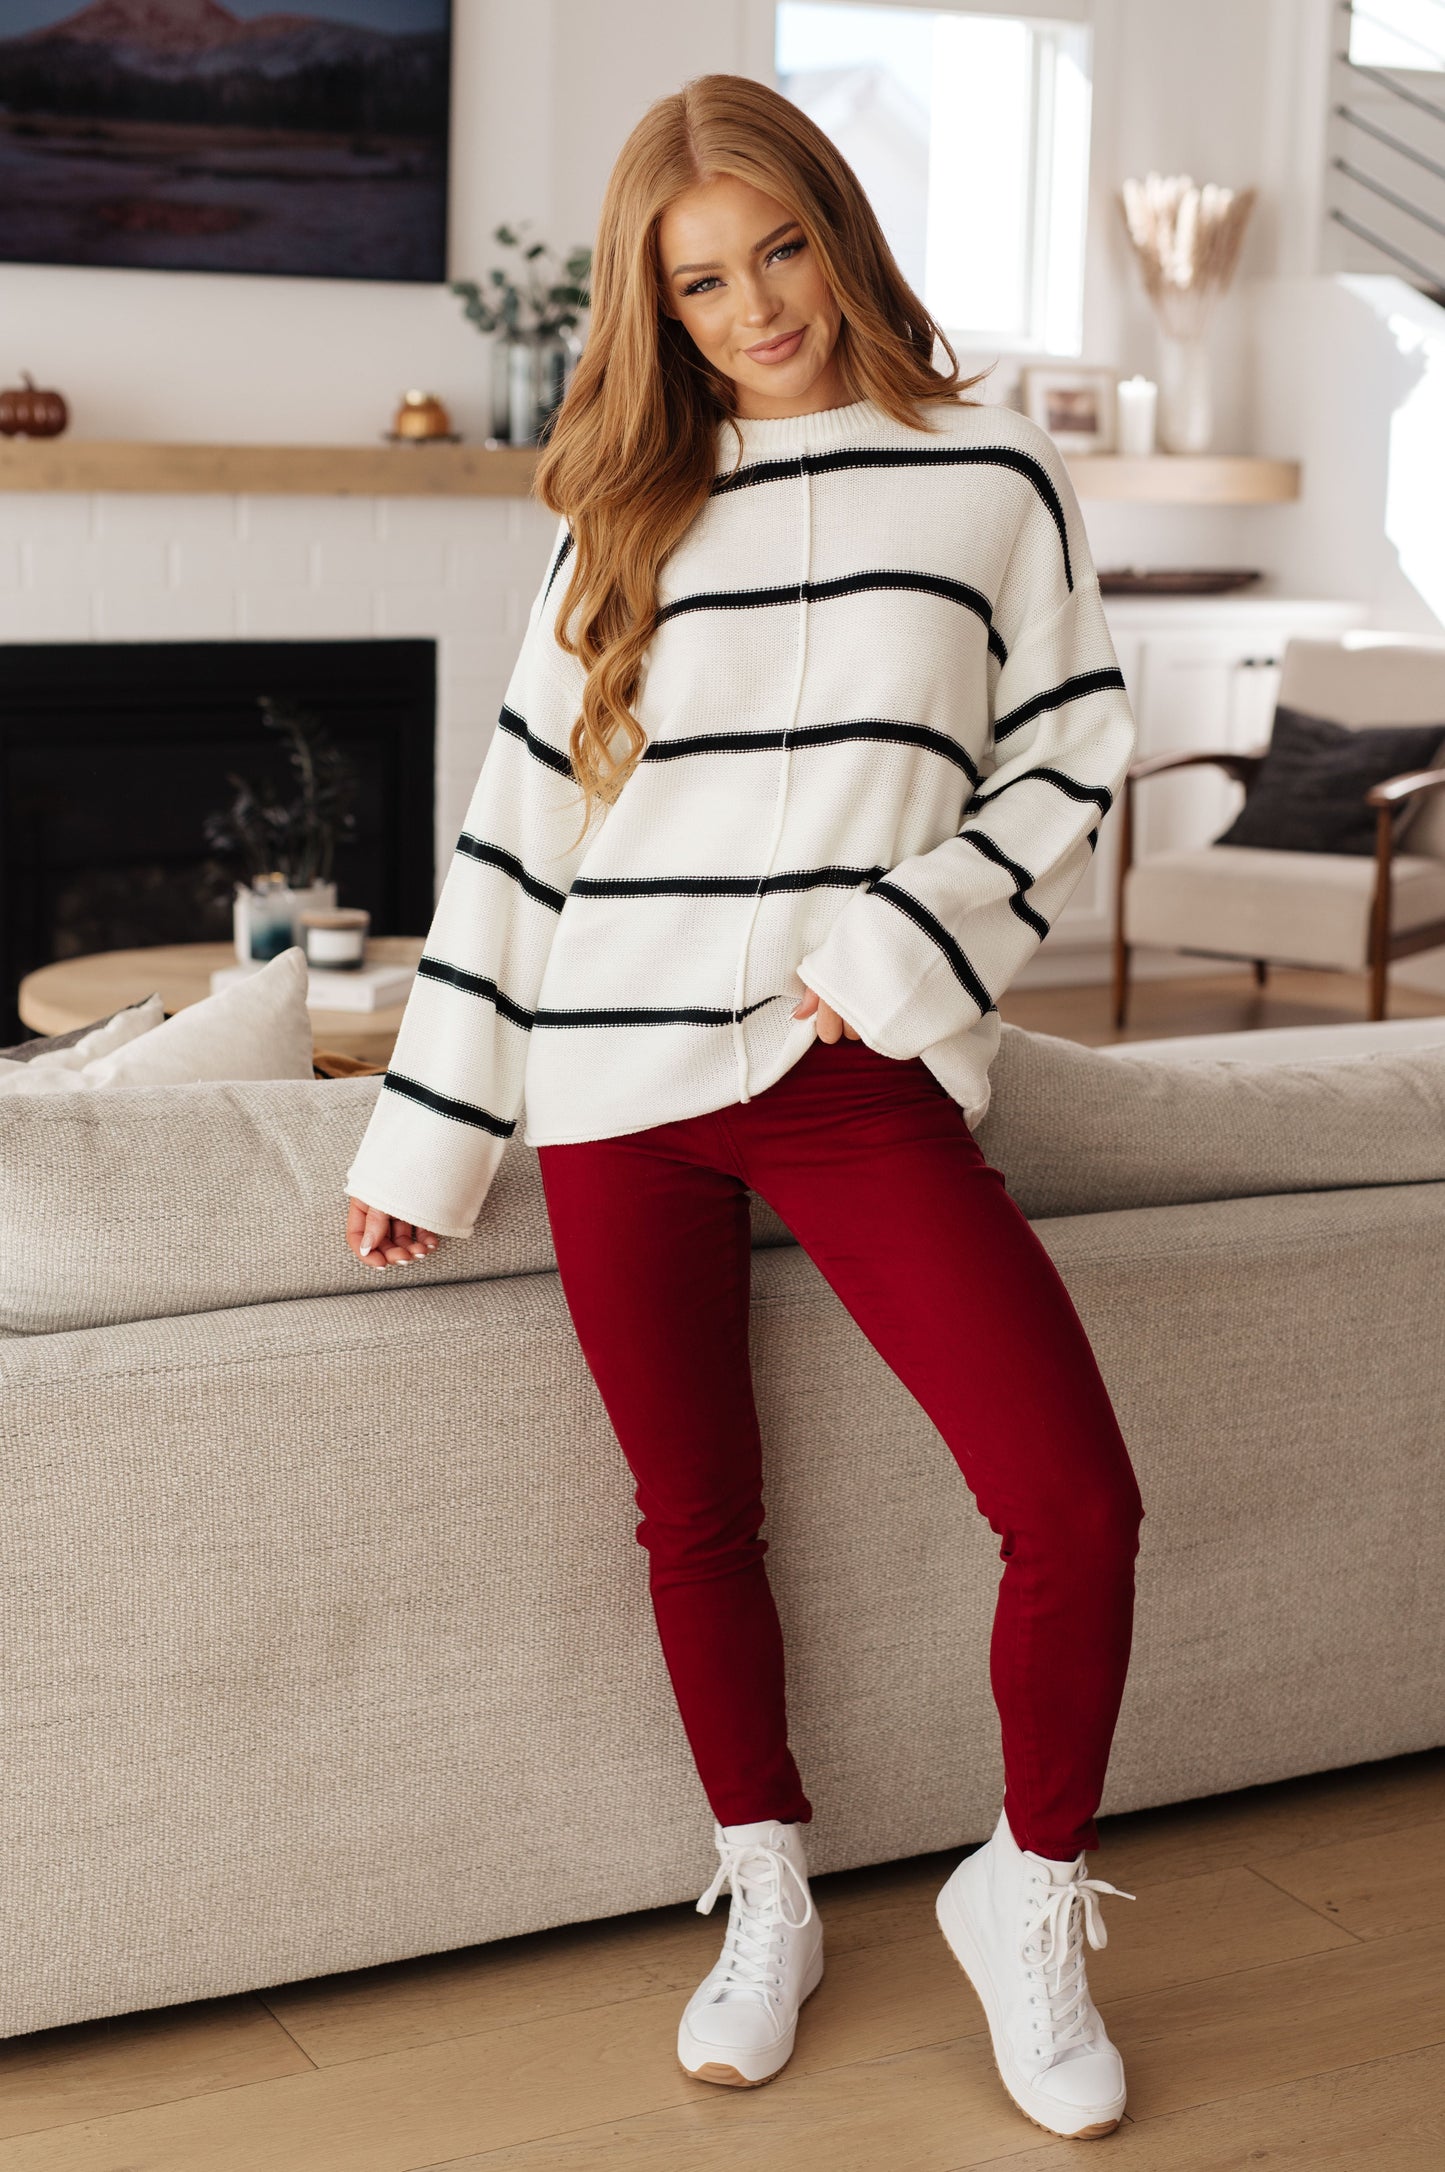 Andree by Unit More or Less Striped Sweater